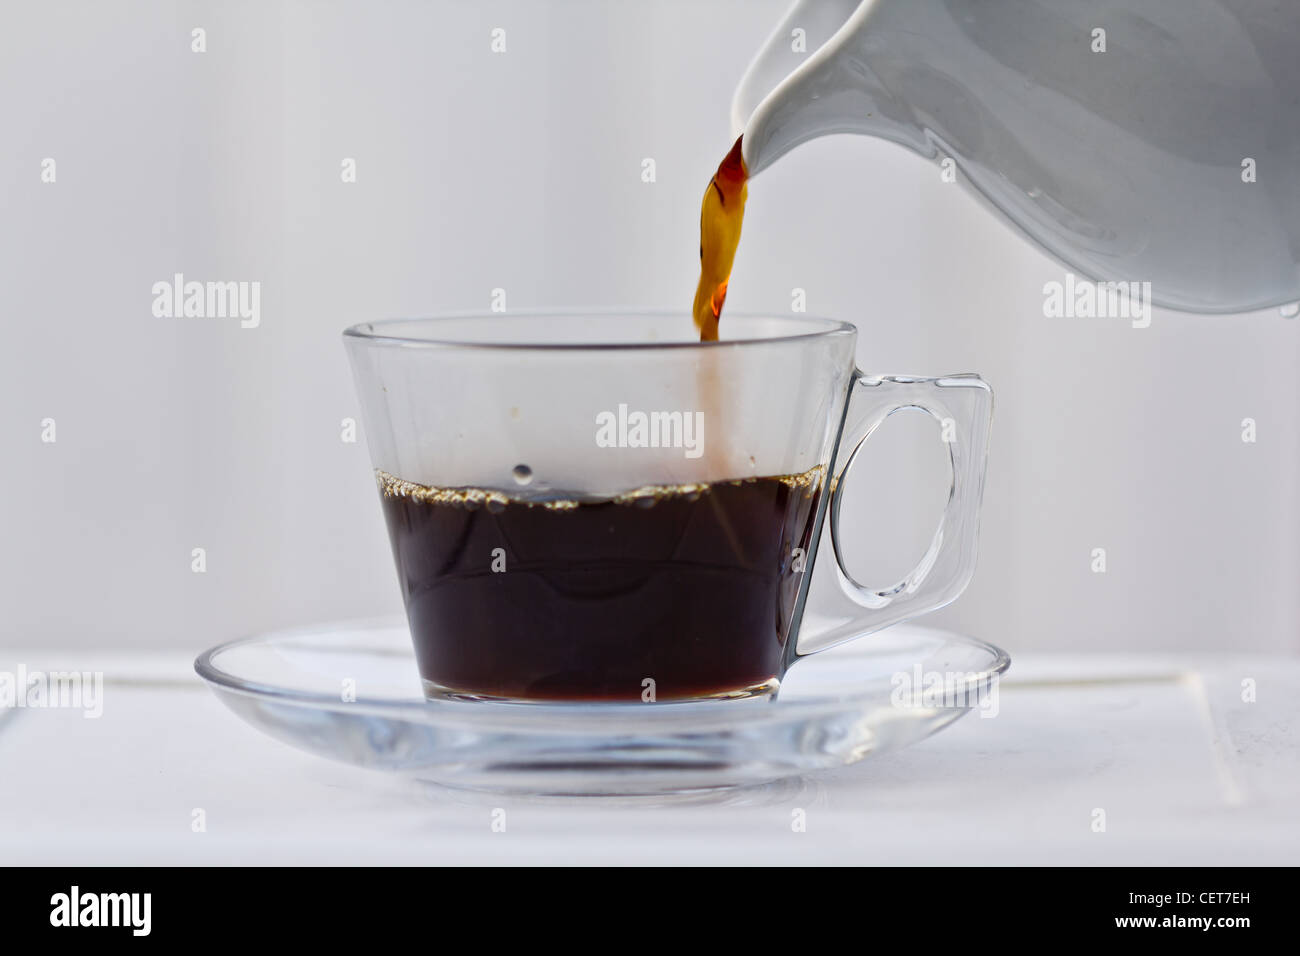 Pouring coffee into a half full clear cup with a saucer. Stock Photo